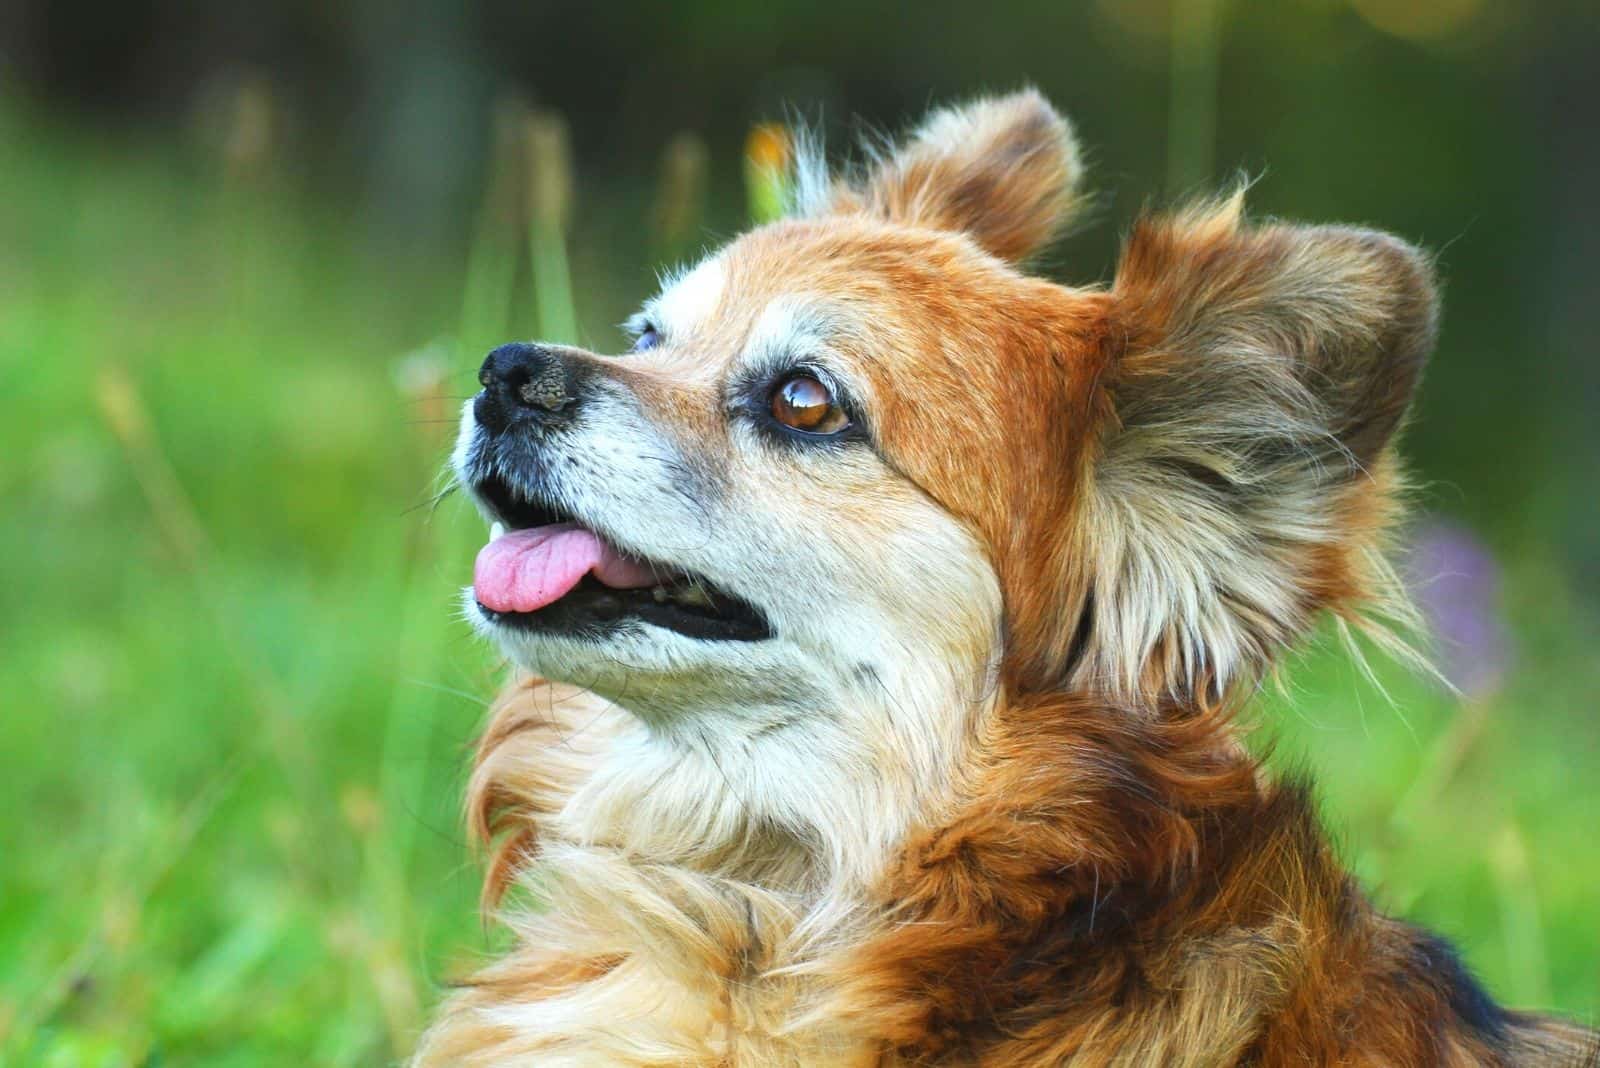 cute crossbreed dog looking up in close up image